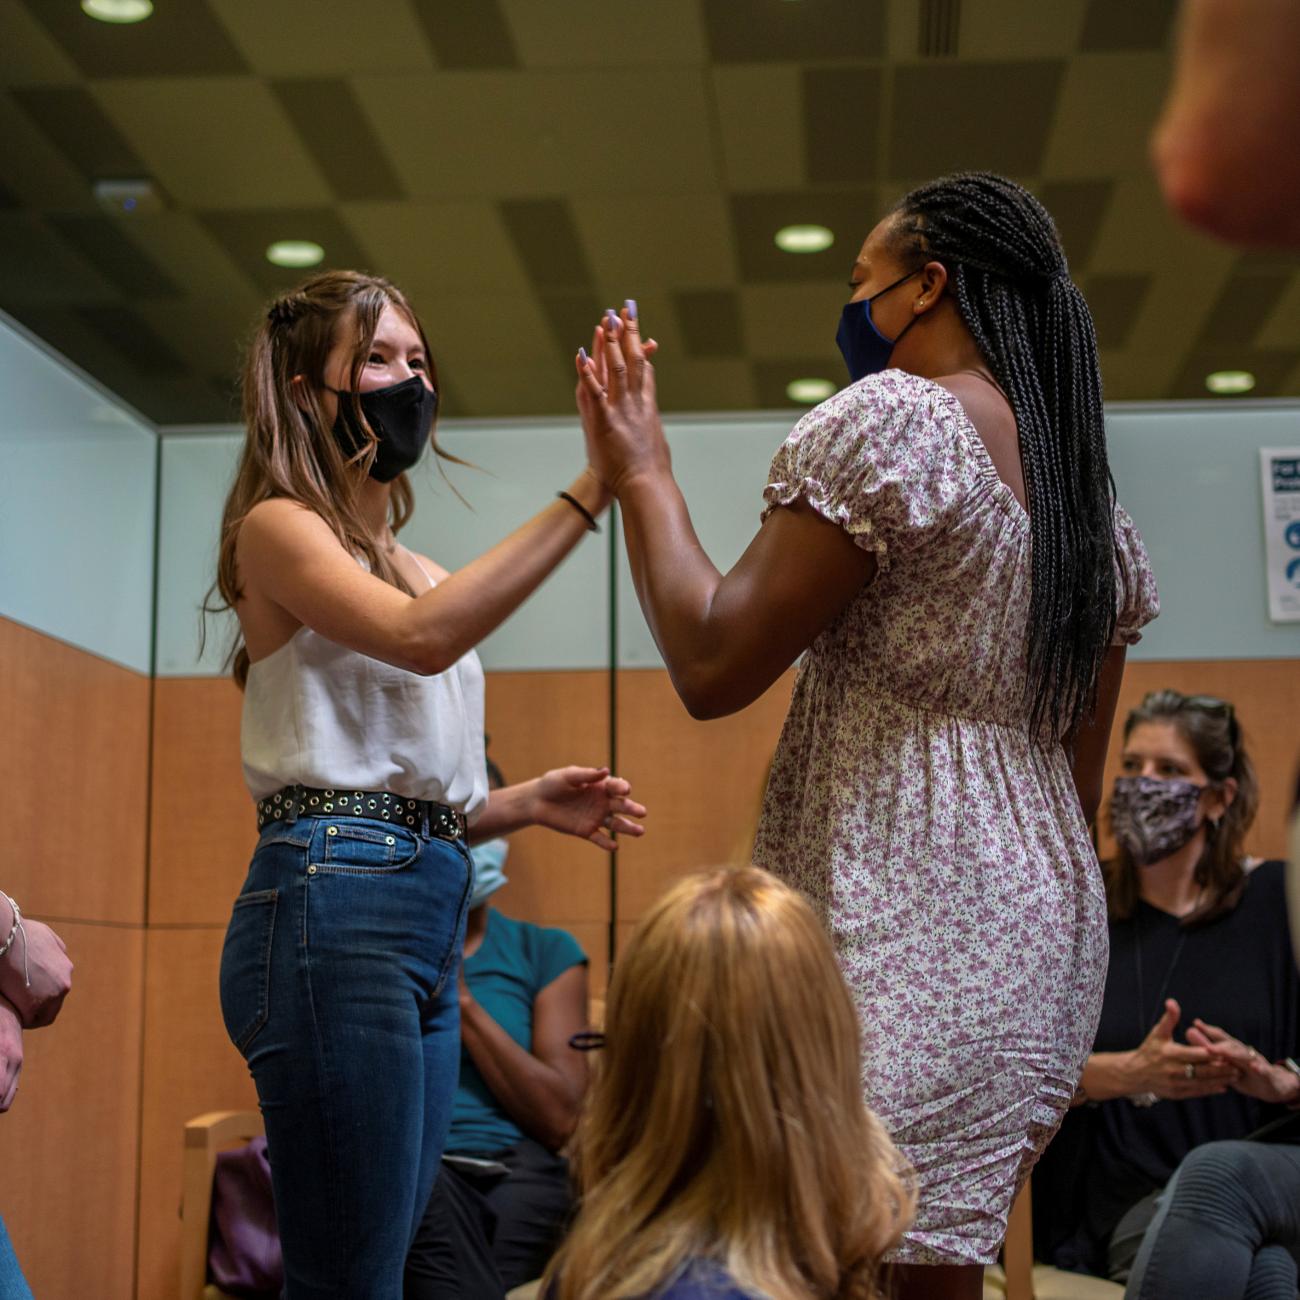 Ava Kreutziger, 14, gives Croix Hill, 15, a high five after Croix received her first dose of the COVID-19 vaccine at the Ochsner Center for Primary Care and Wellness, in New Orleans, Louisiana, May 13, 2021. 